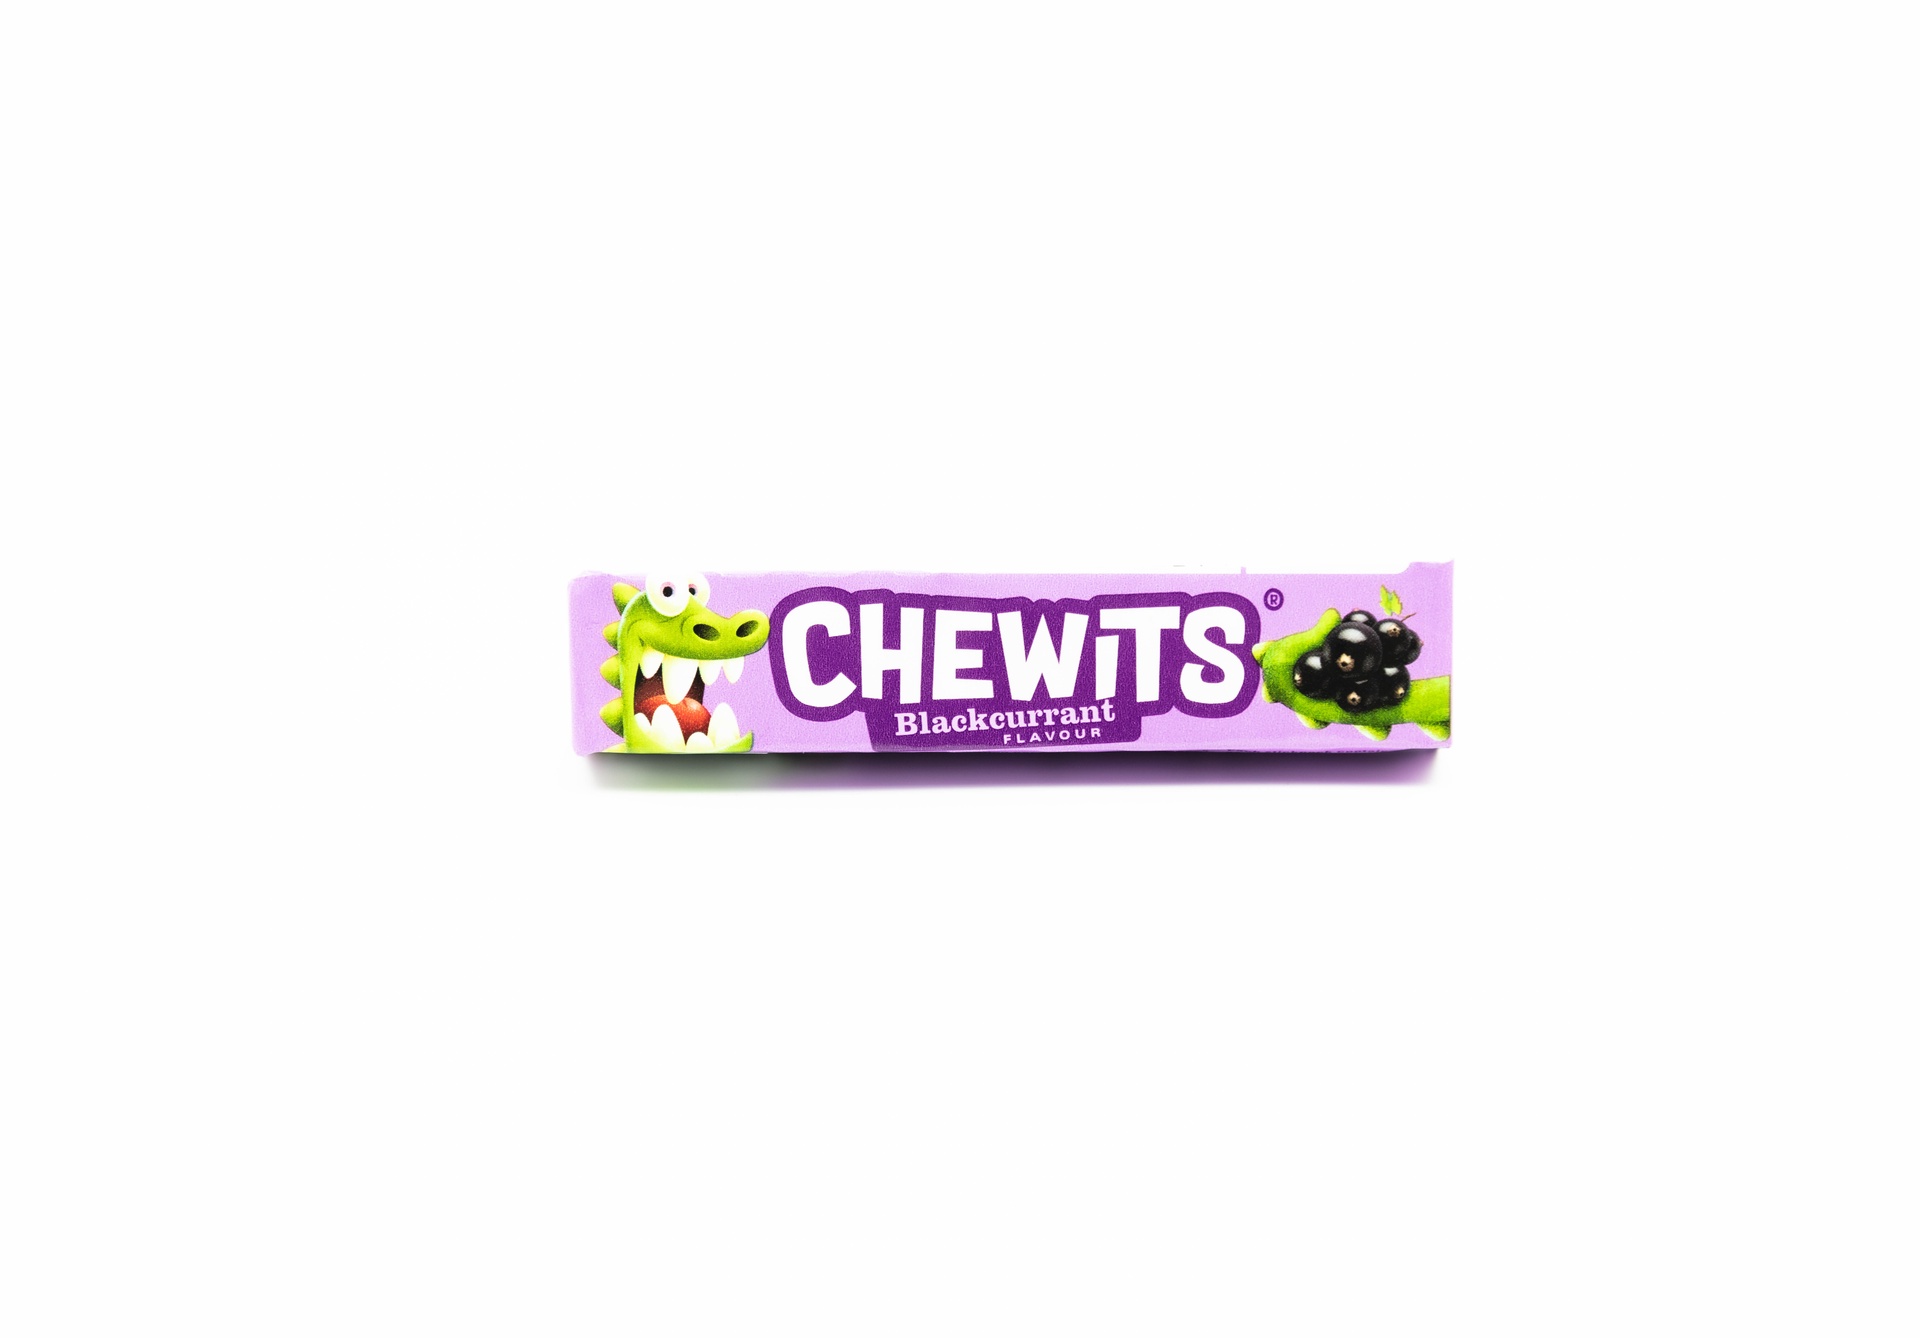 Chewits Blackcurrant - Best Of British